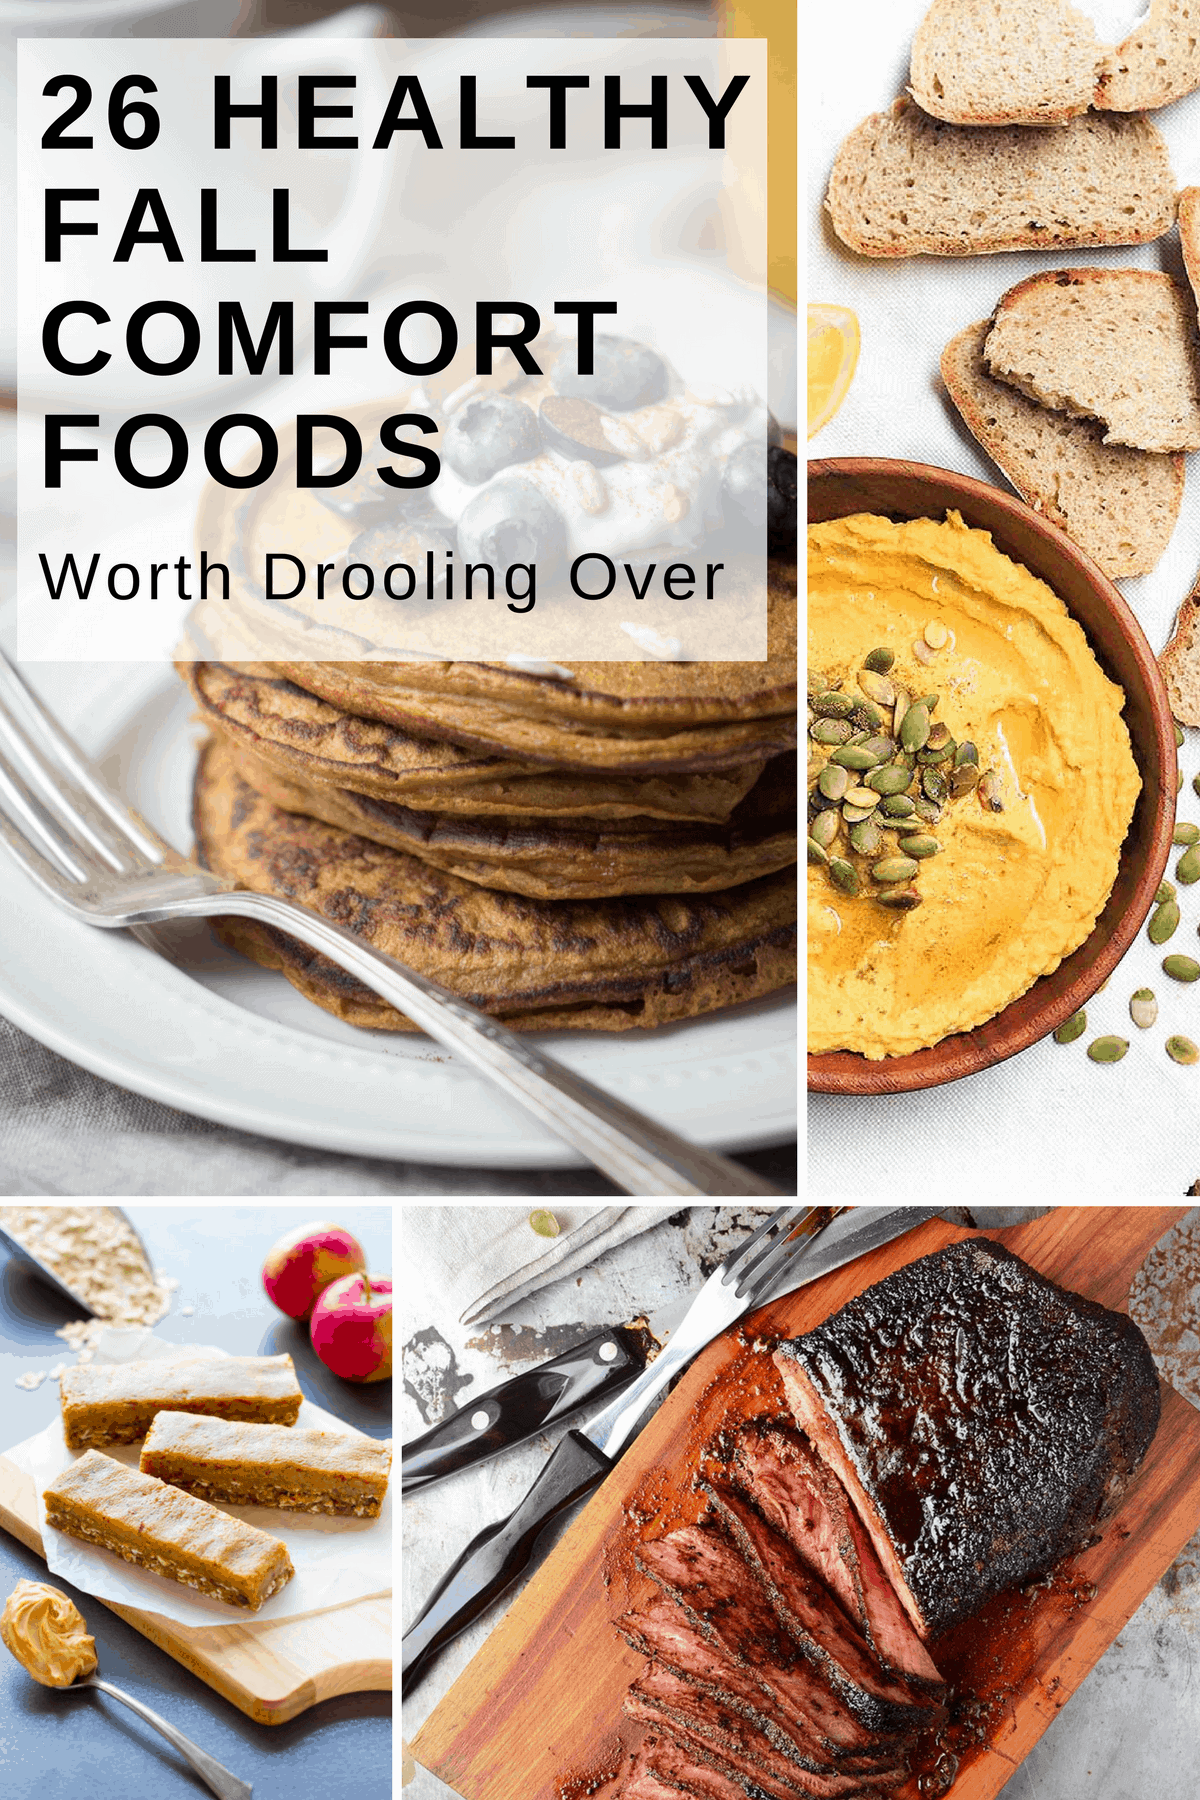 26 healthy fall comfort foods worth drooling over